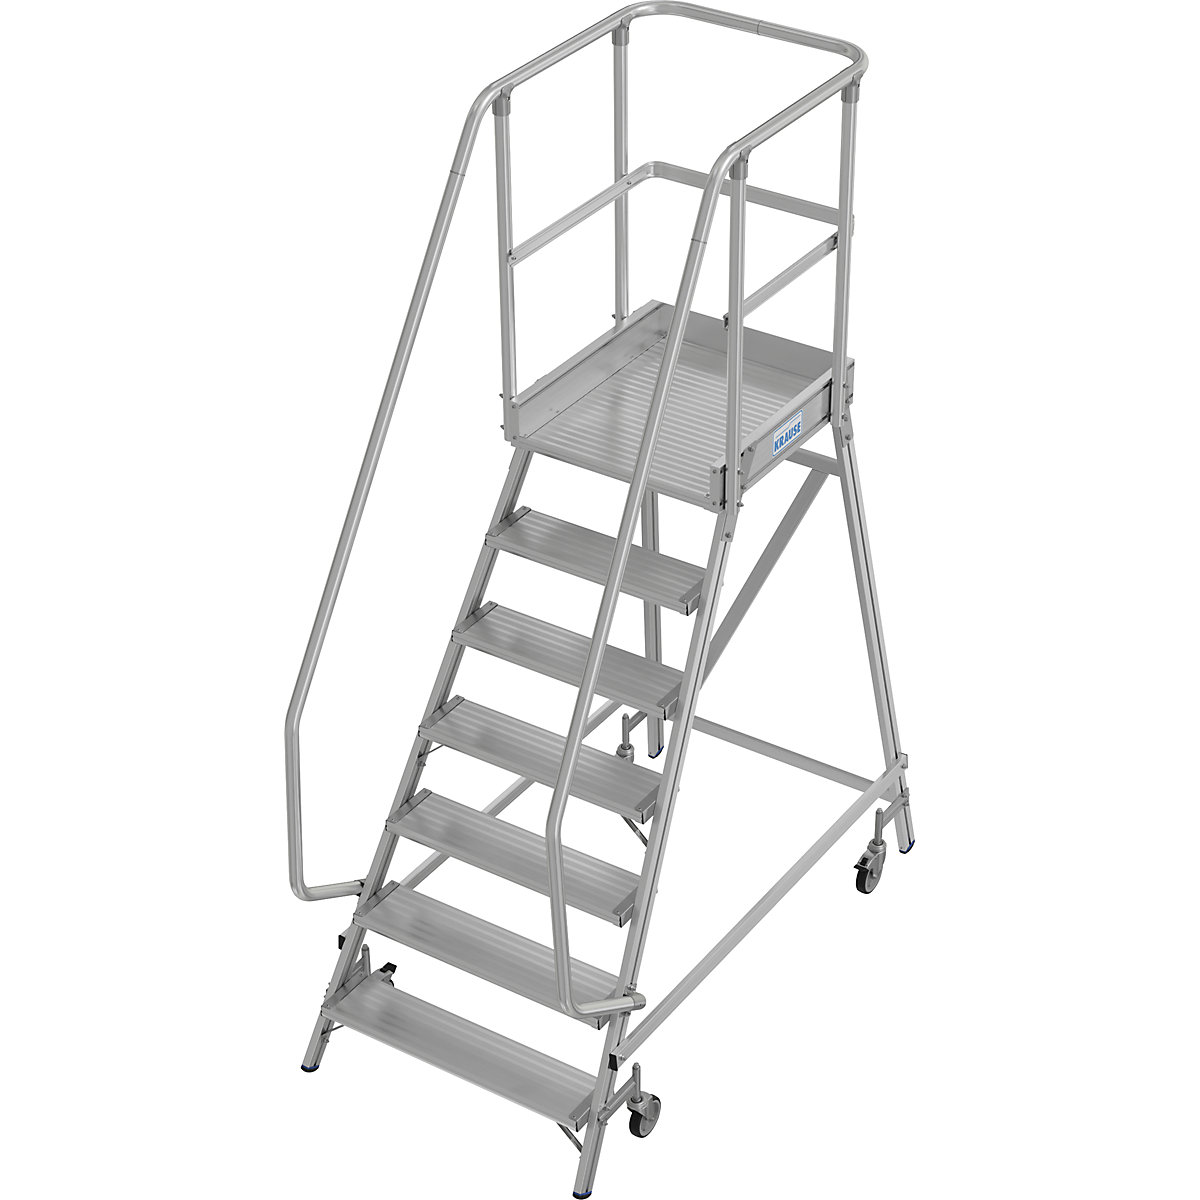 Mobile safety steps – KRAUSE, single sided access, 7 steps-11